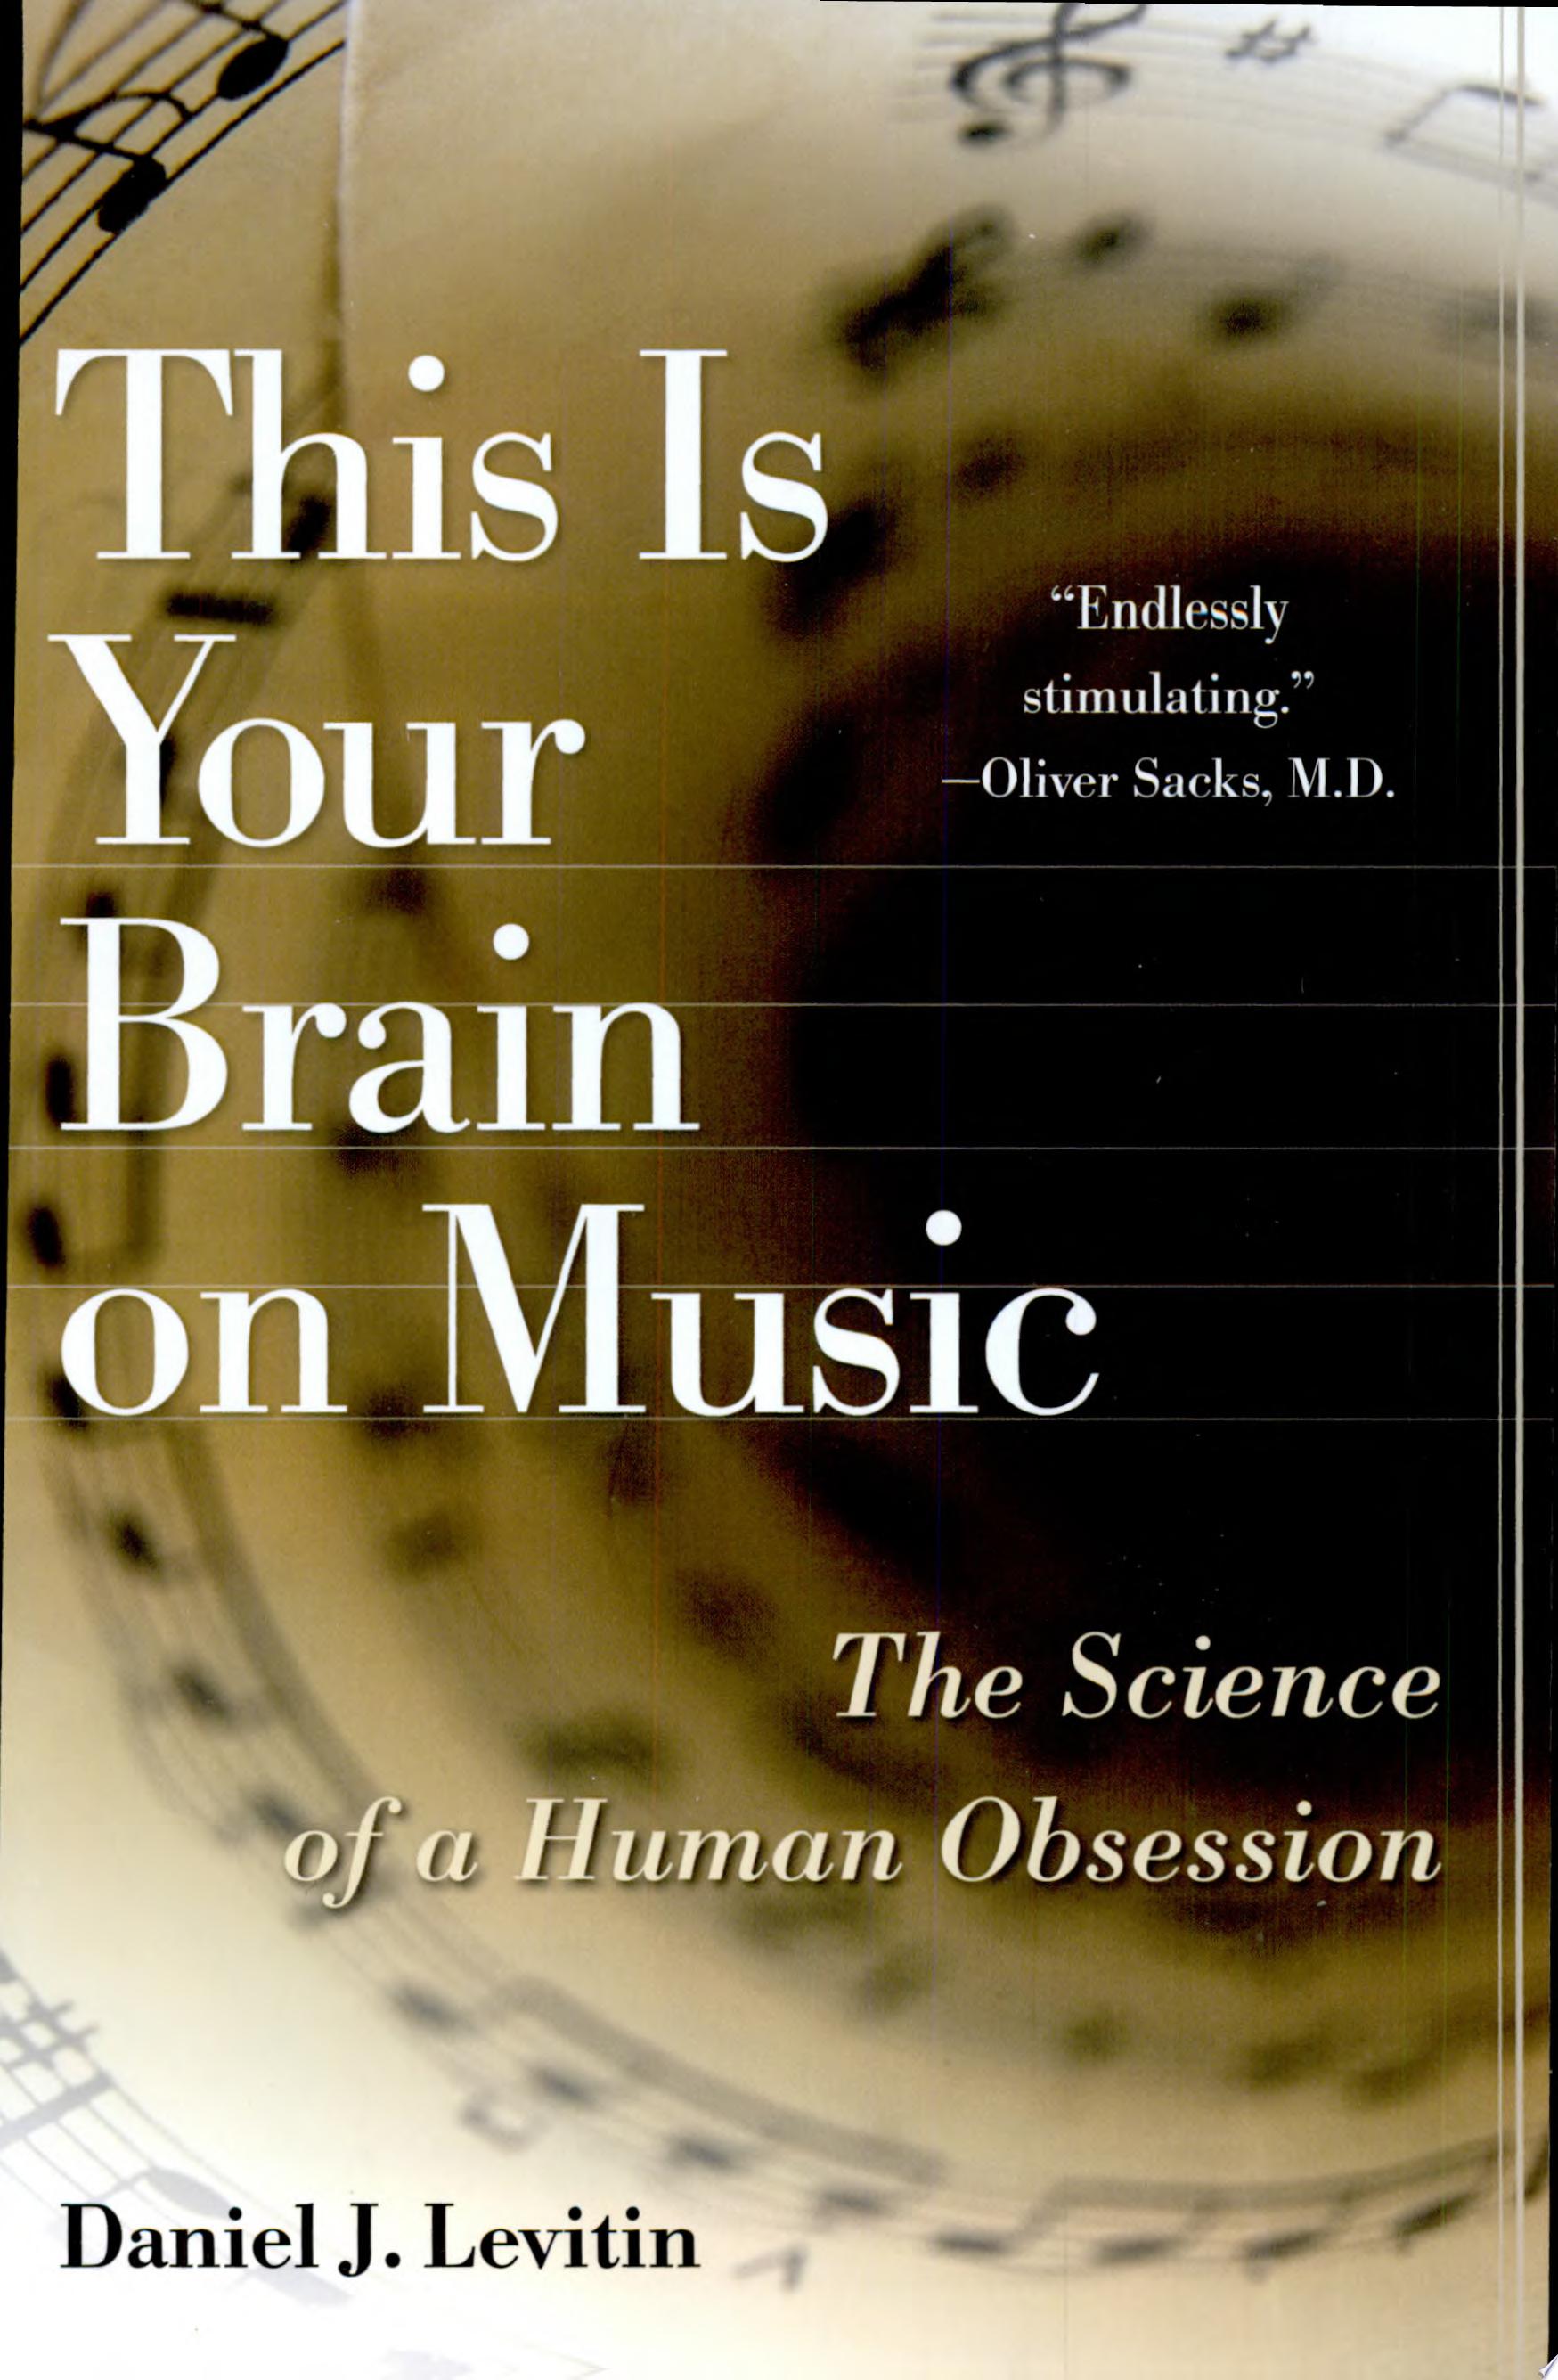 Image for "This is Your Brain on Music"